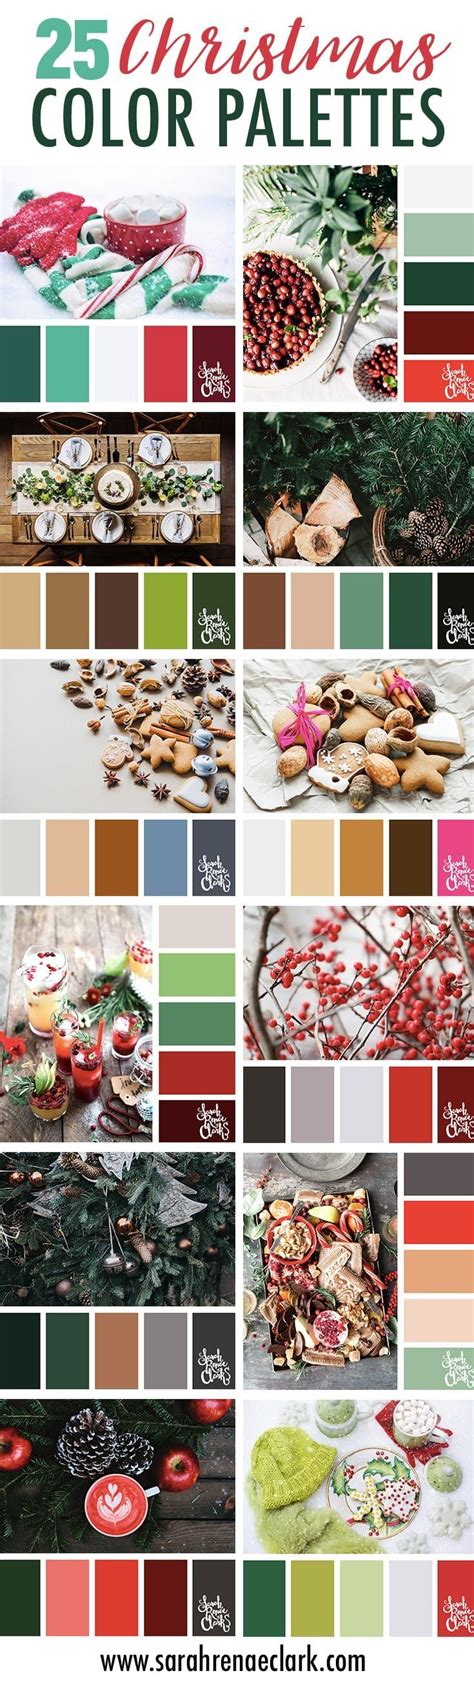 25 Christmas Color Palettes Color Schemes For All Your Christmas